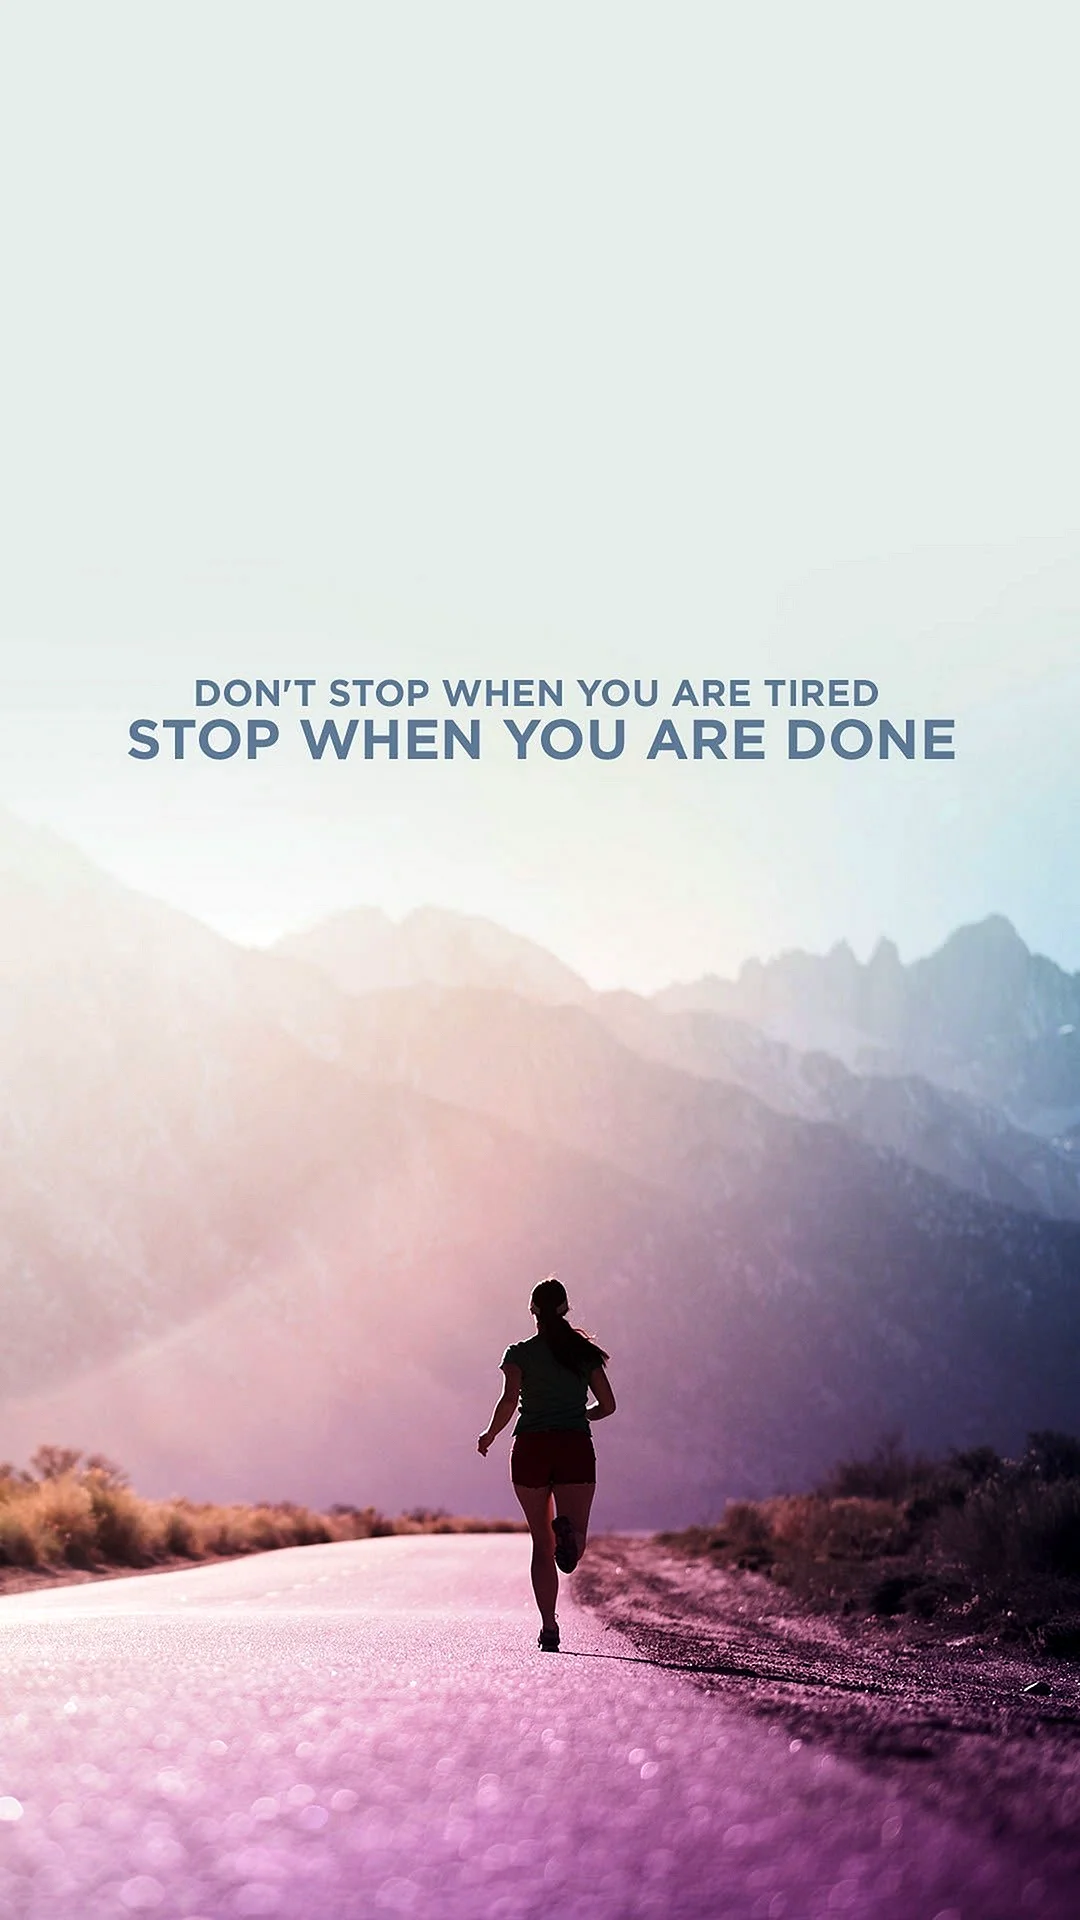 Motivation iPhone Wallpaper For iPhone